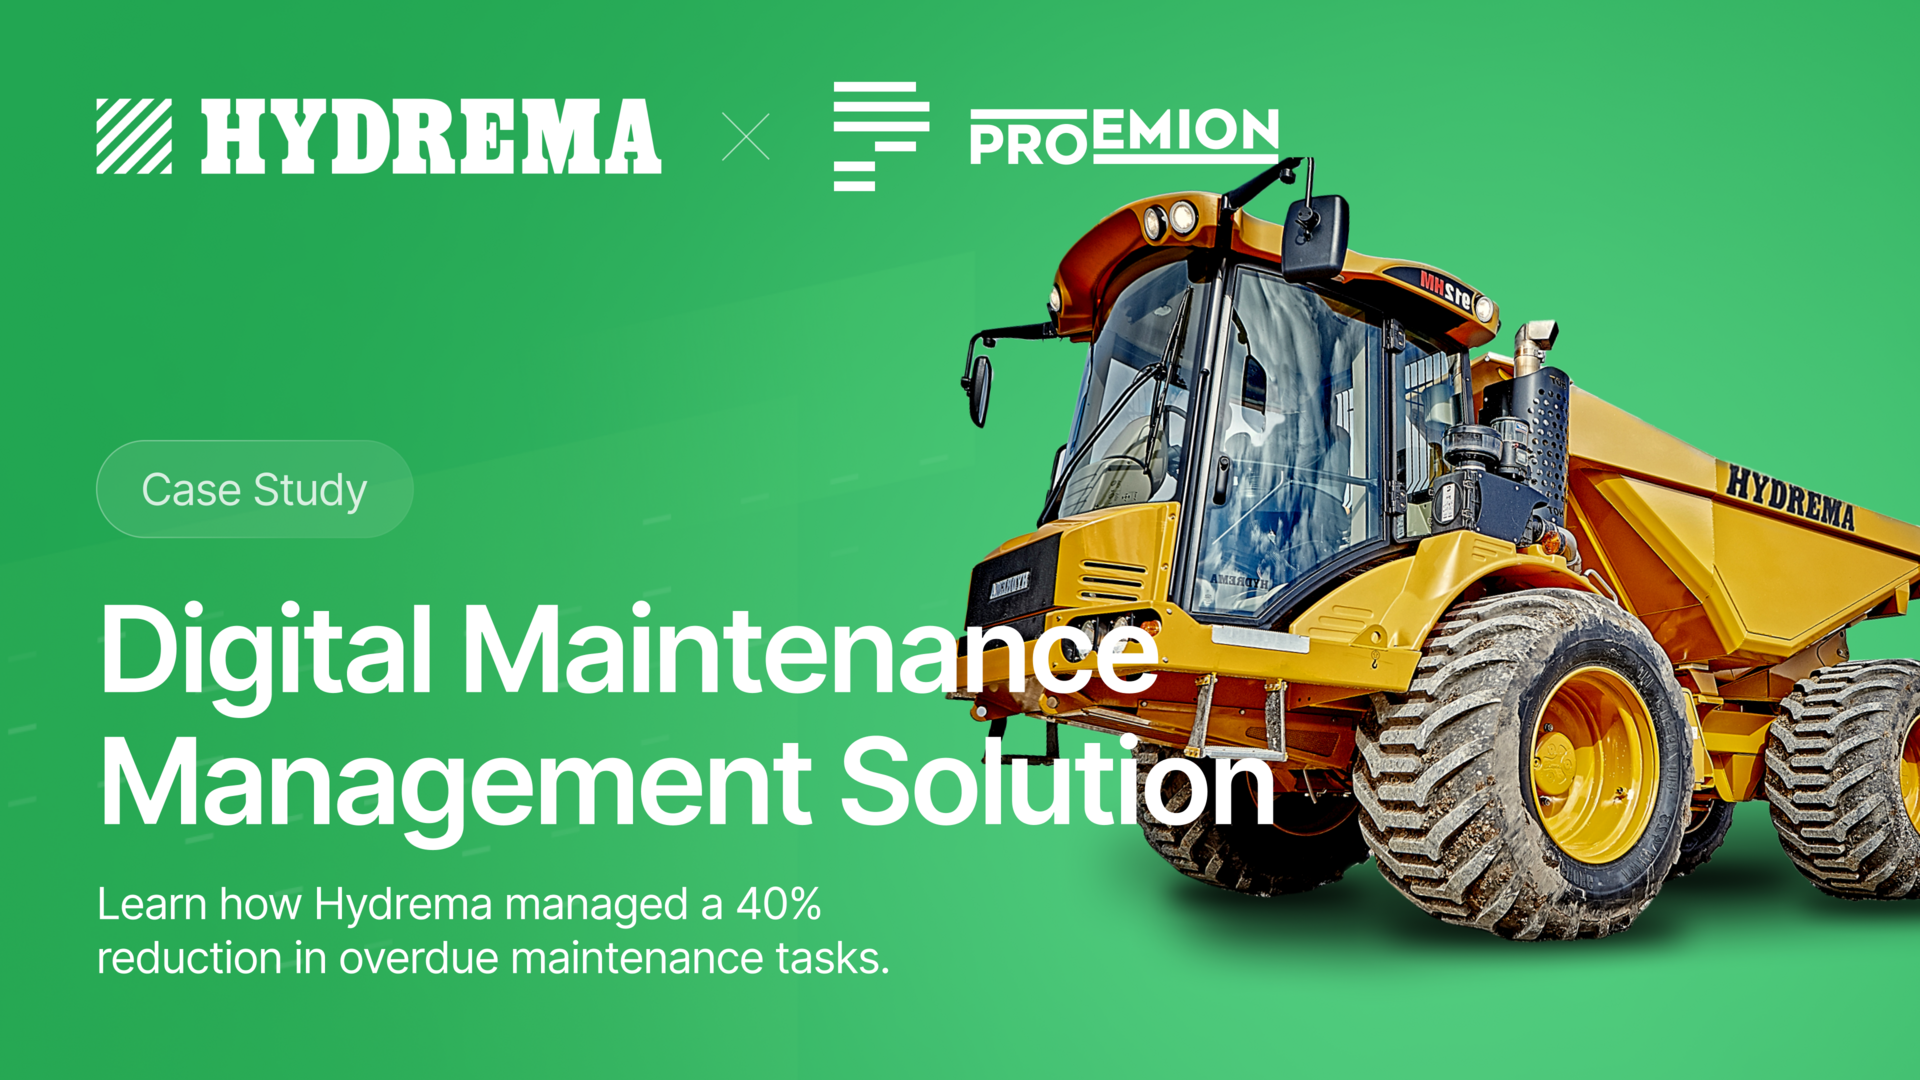 Reducing Downtime and Travel Costs with Proemion Telematics: A Hydrema Success Story